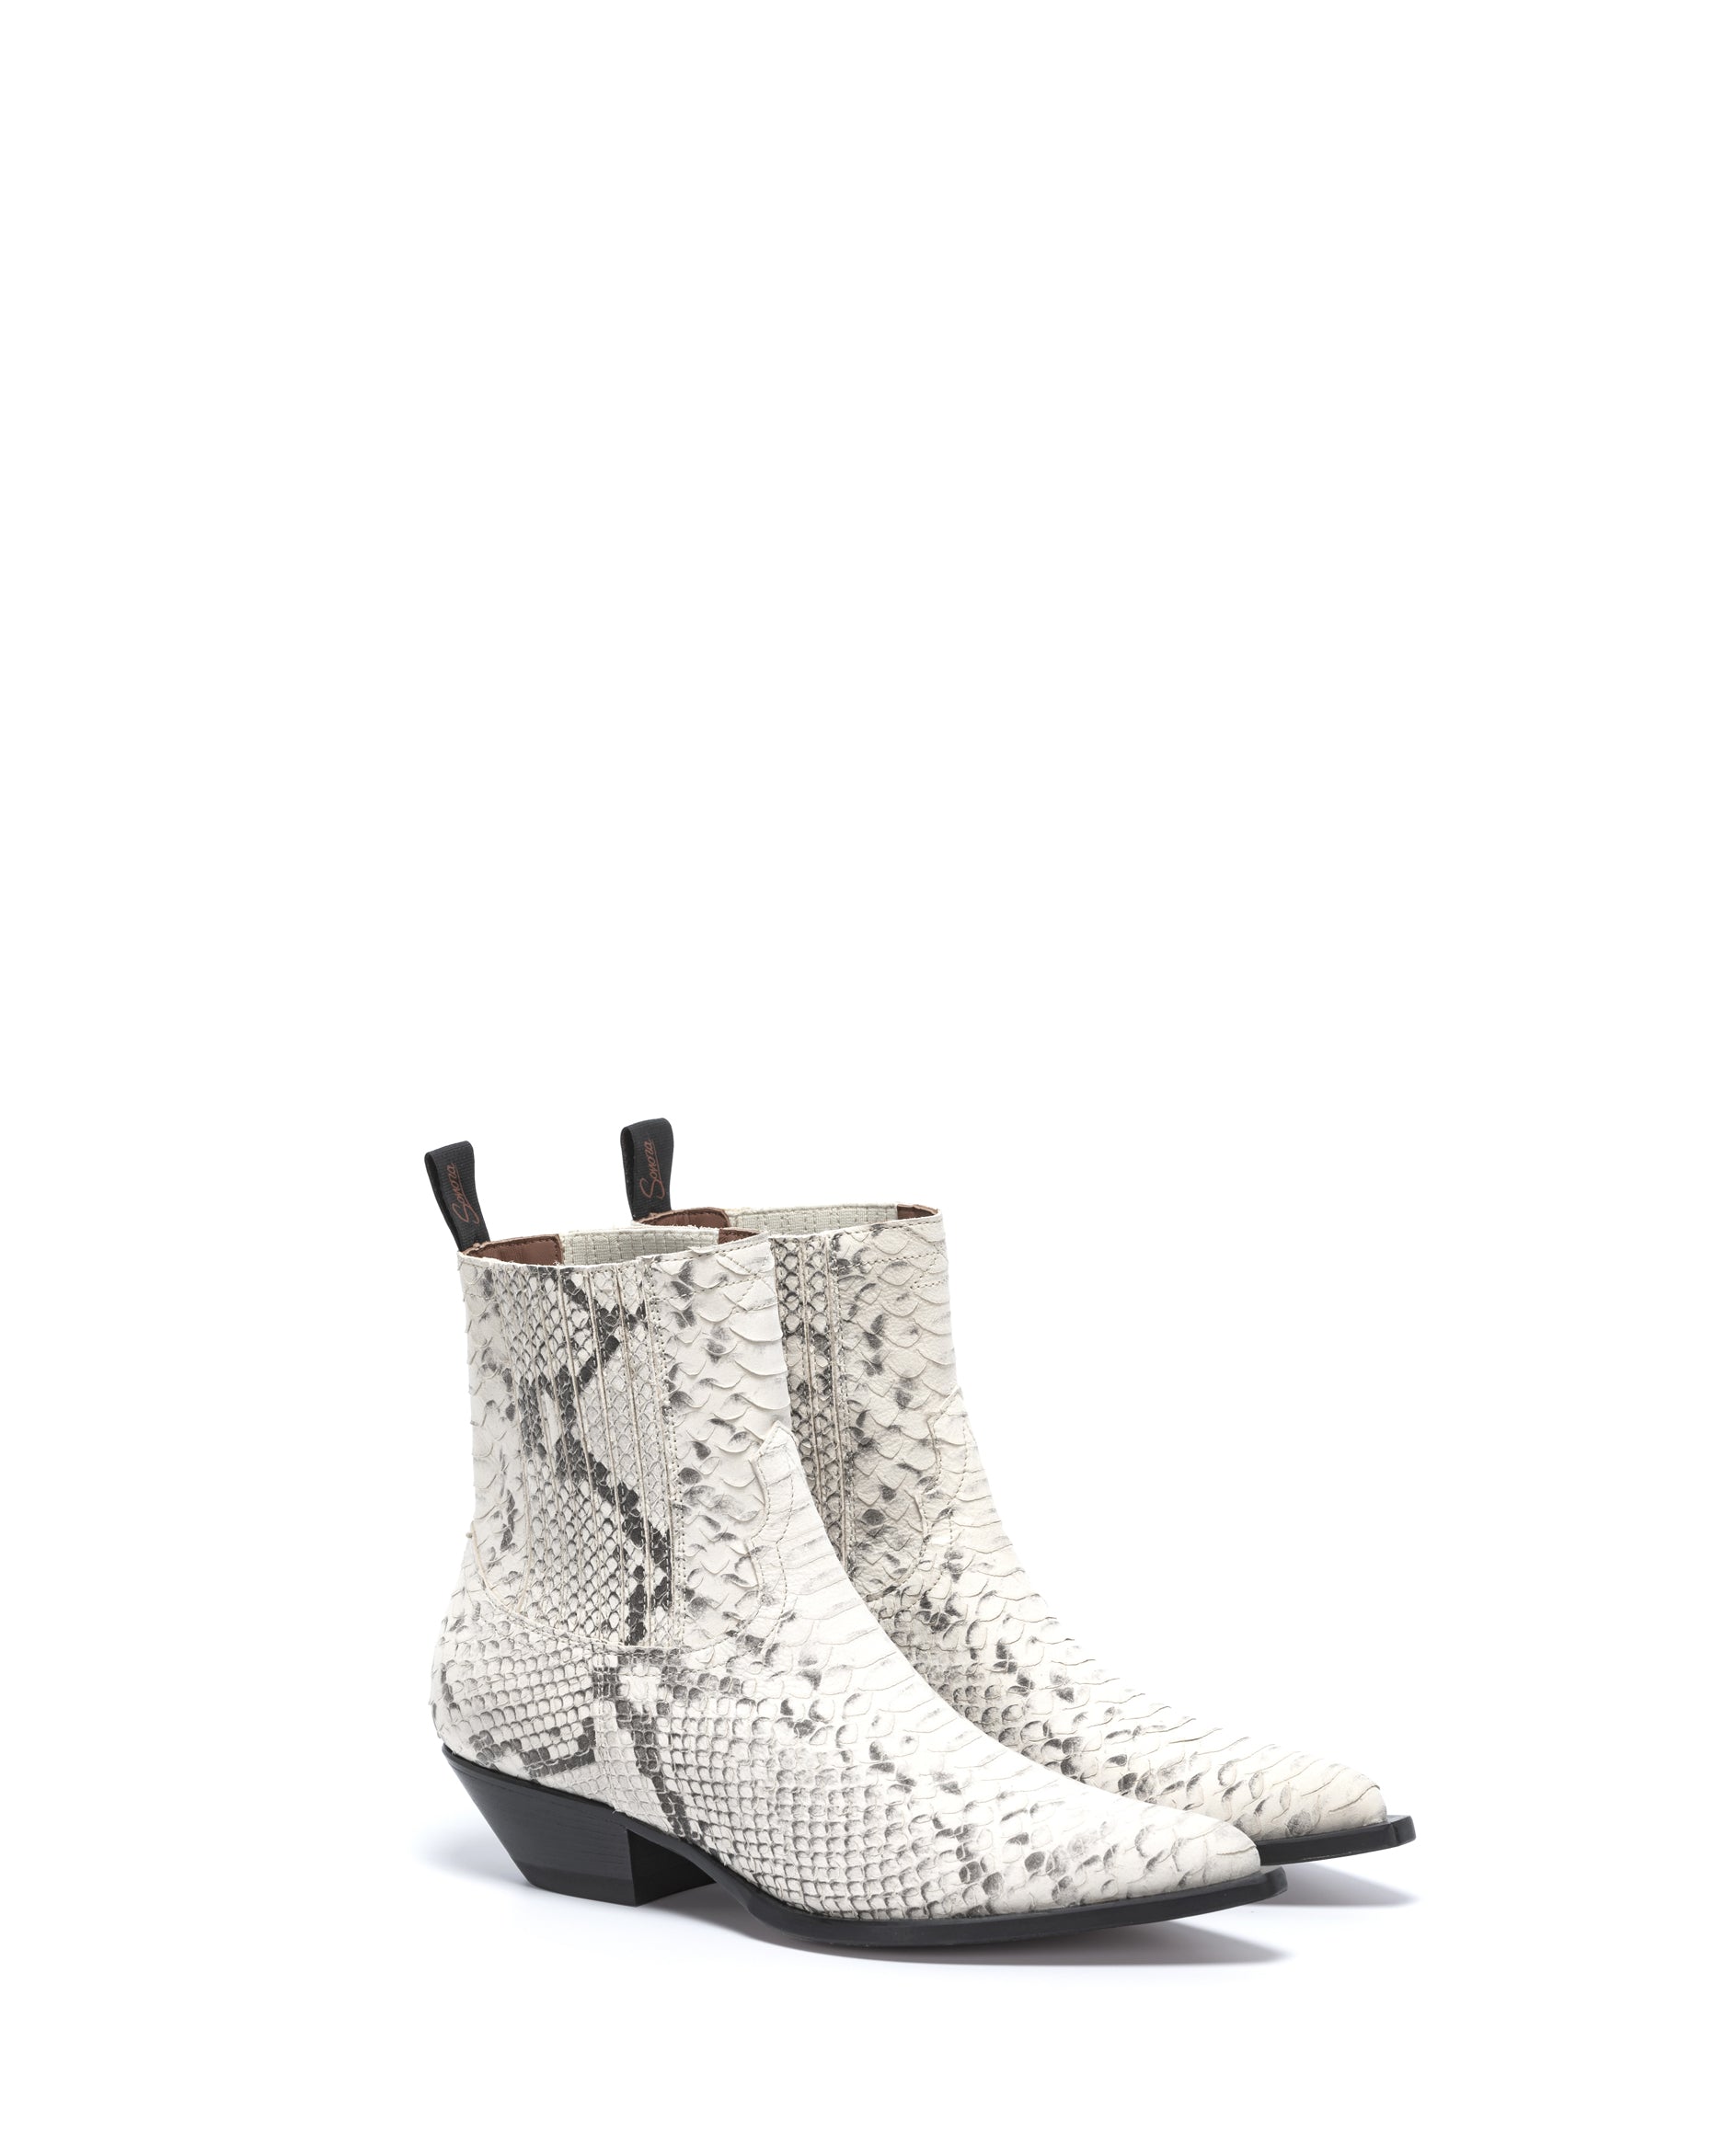 HIDALGO Women's Ankle Boots in Grey Printed Python